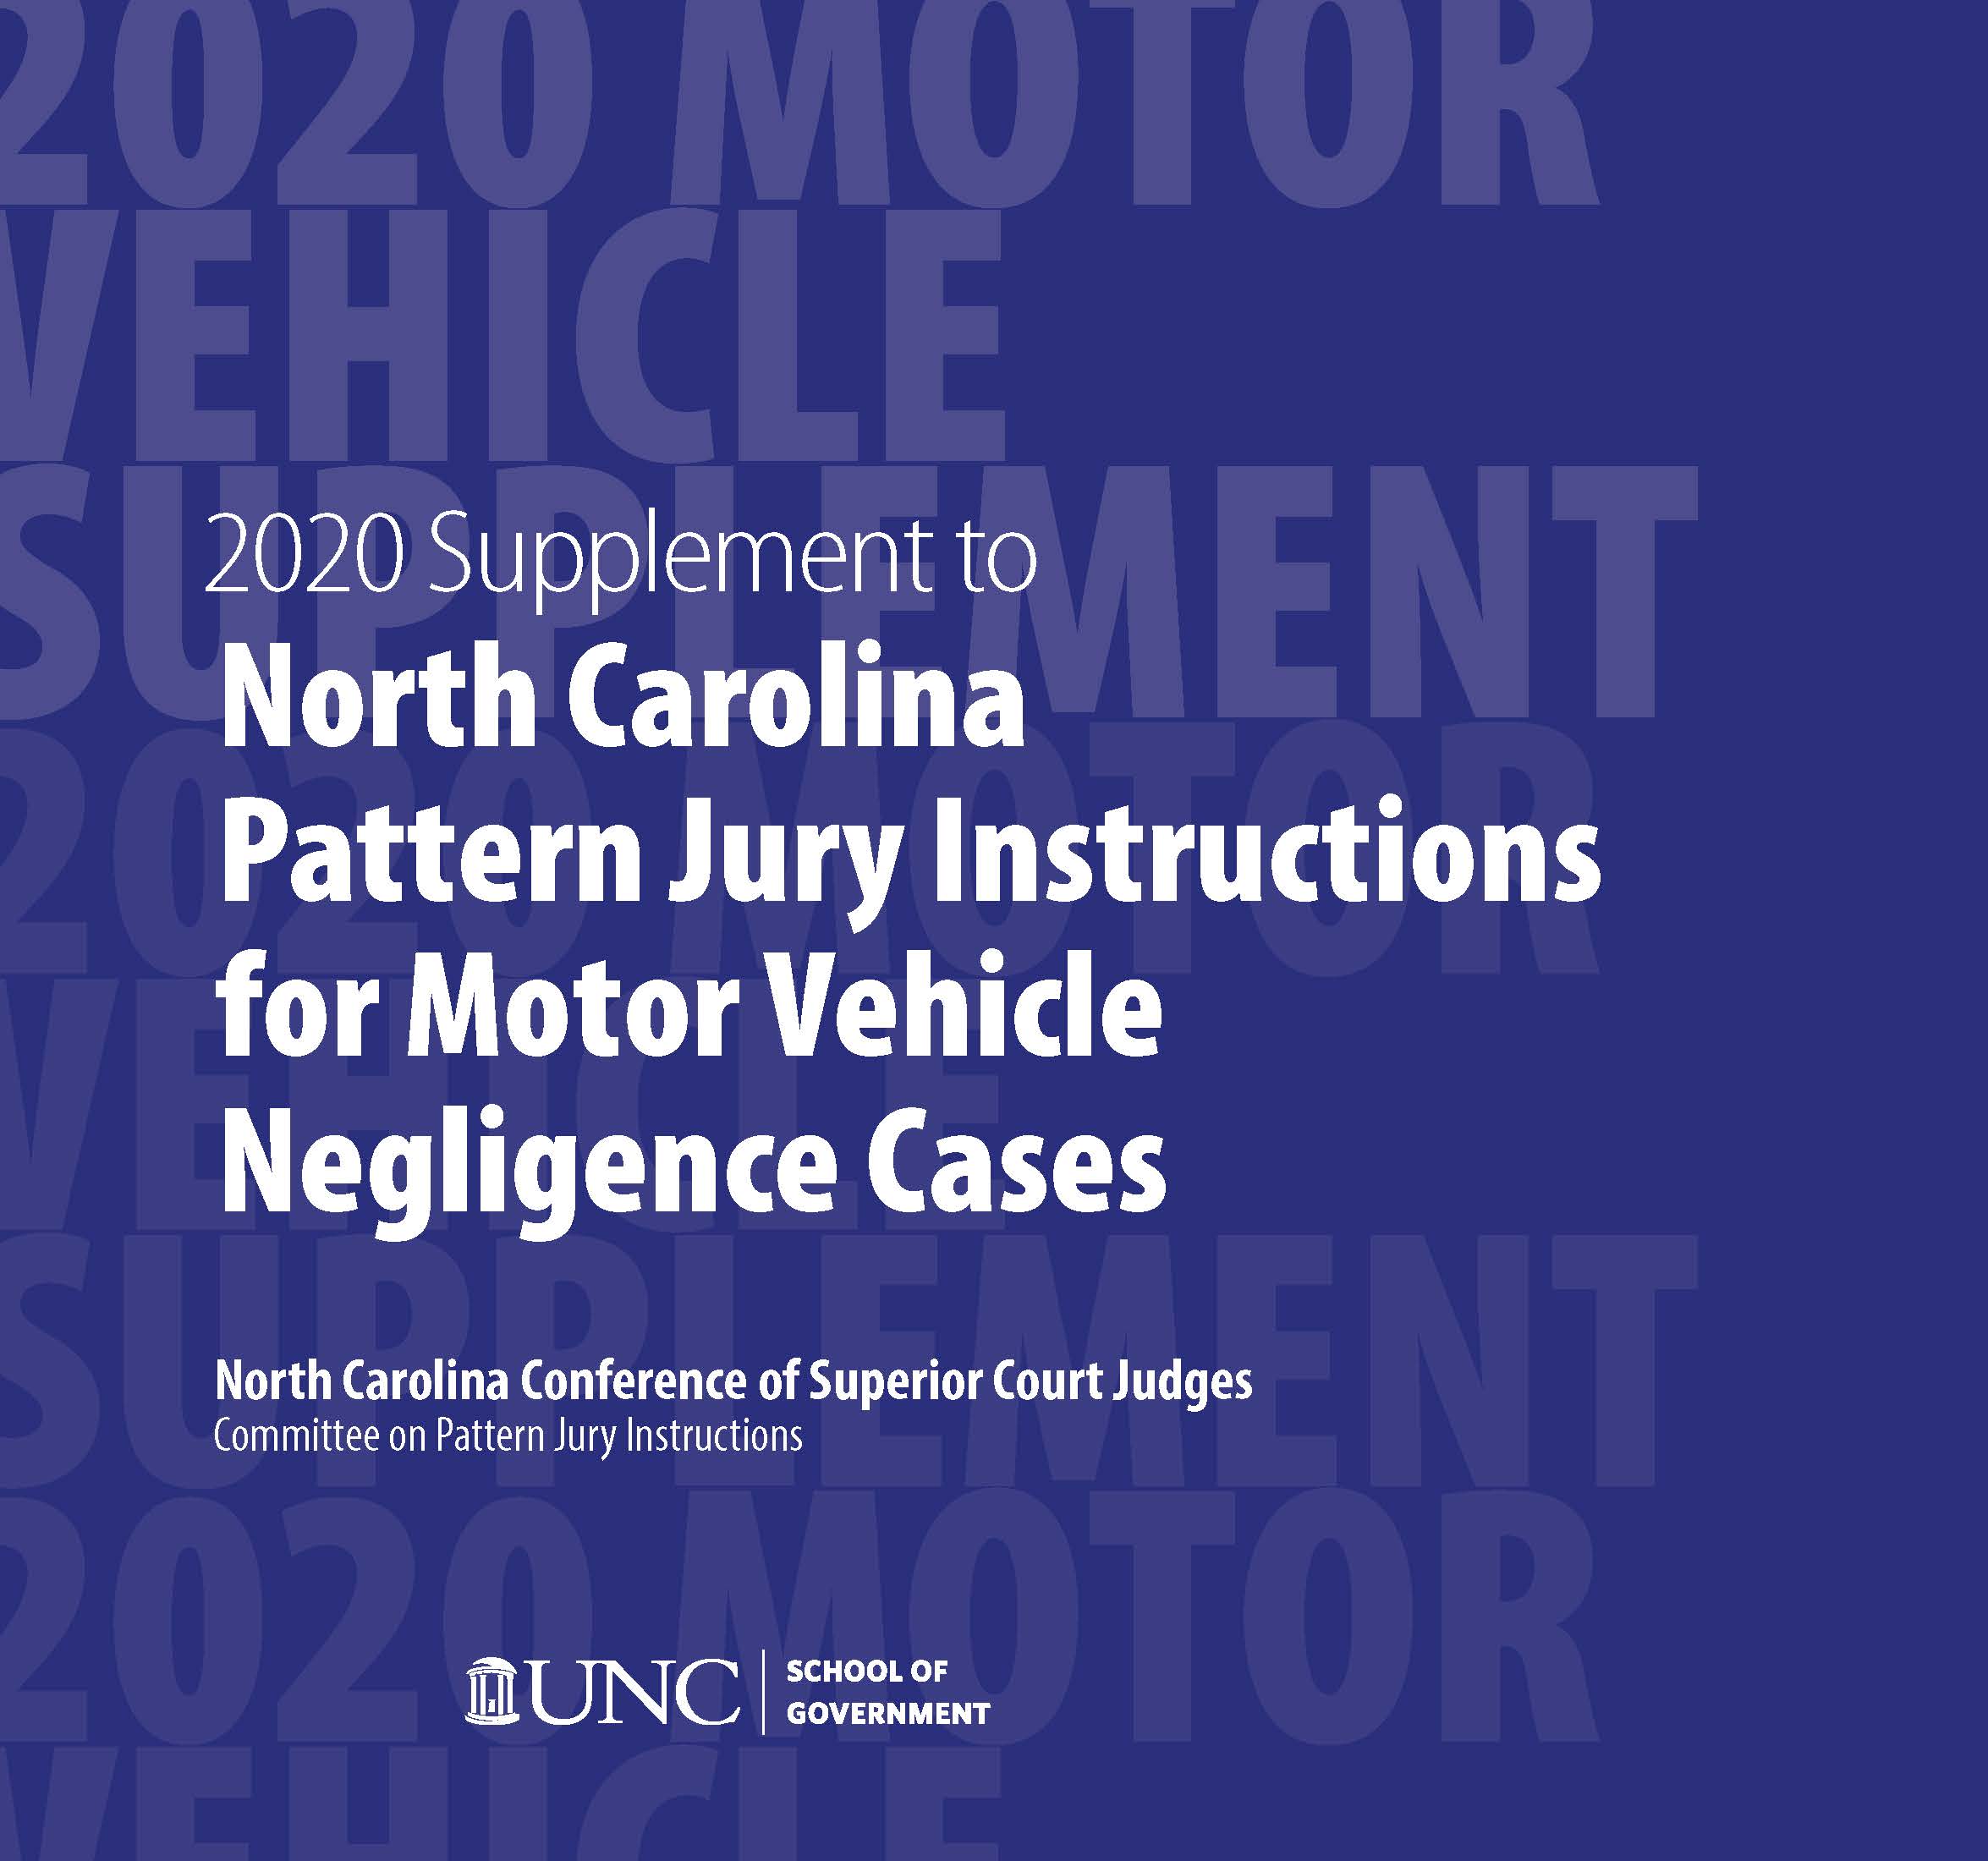 Cover image for June 2020 Supplement to North Carolina Pattern Jury Instructions for Motor Vehicle Negligence Cases